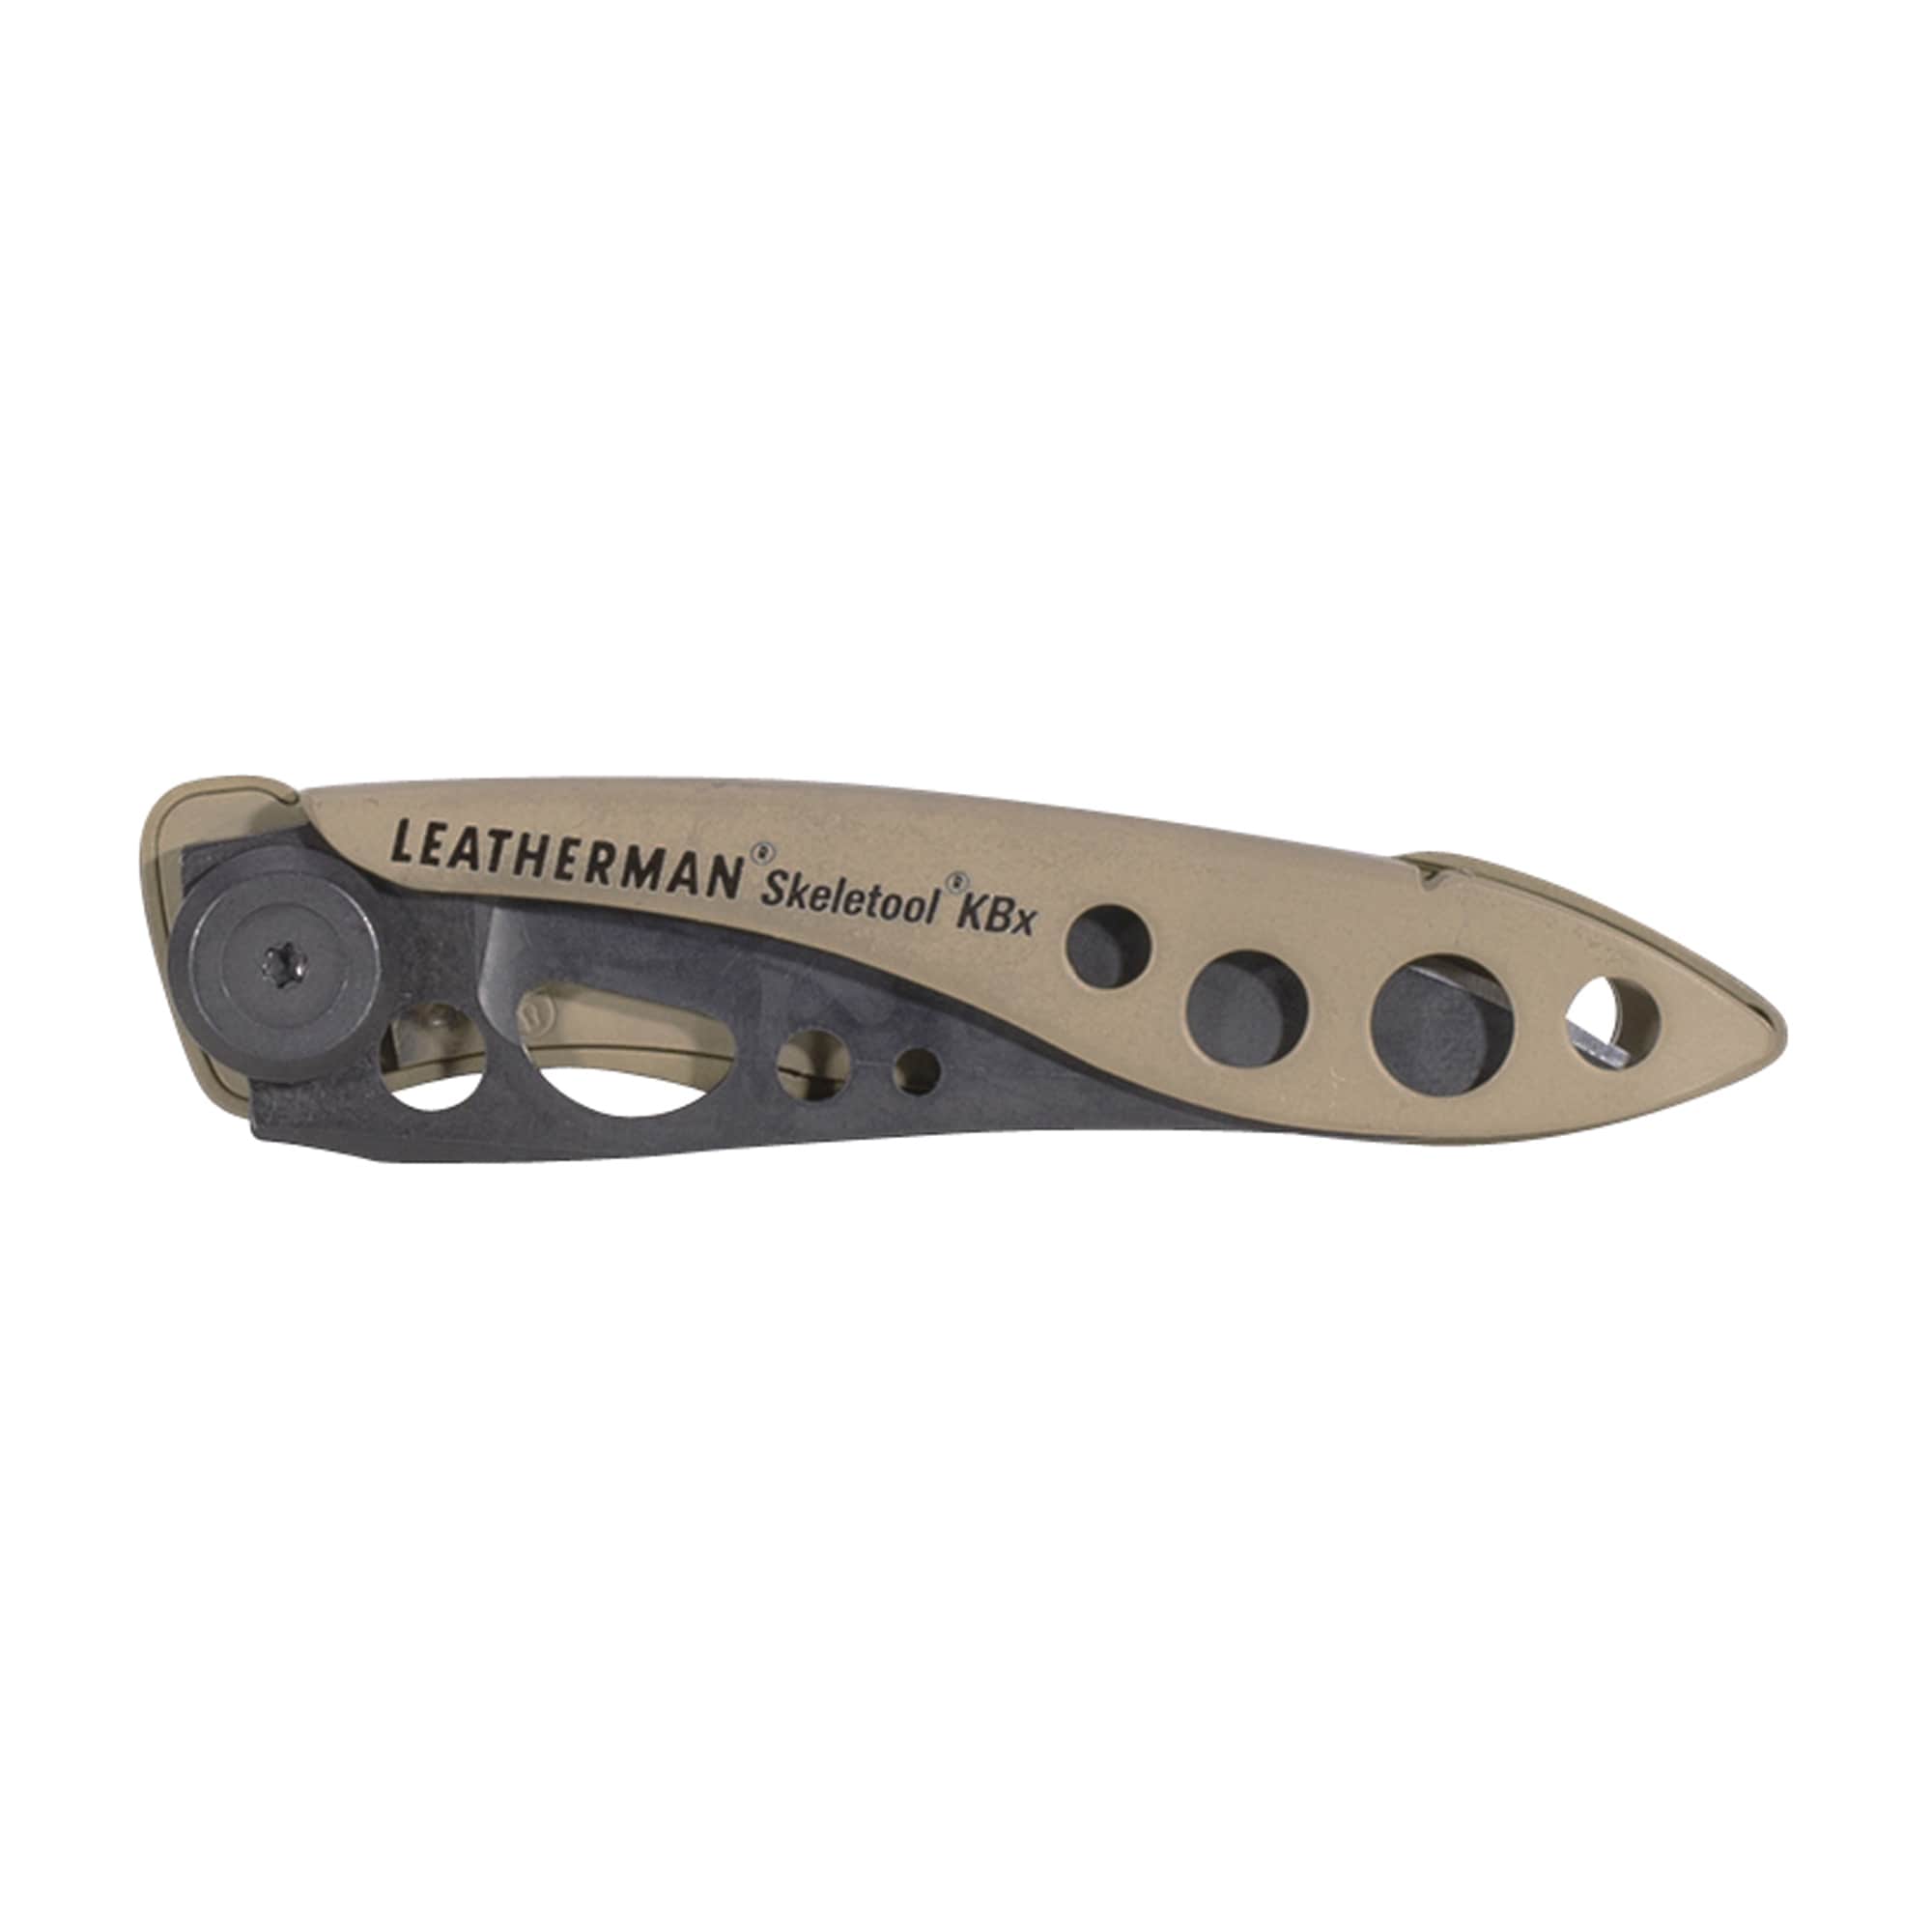 Purchase the Leatherman Skeletool by ASMC